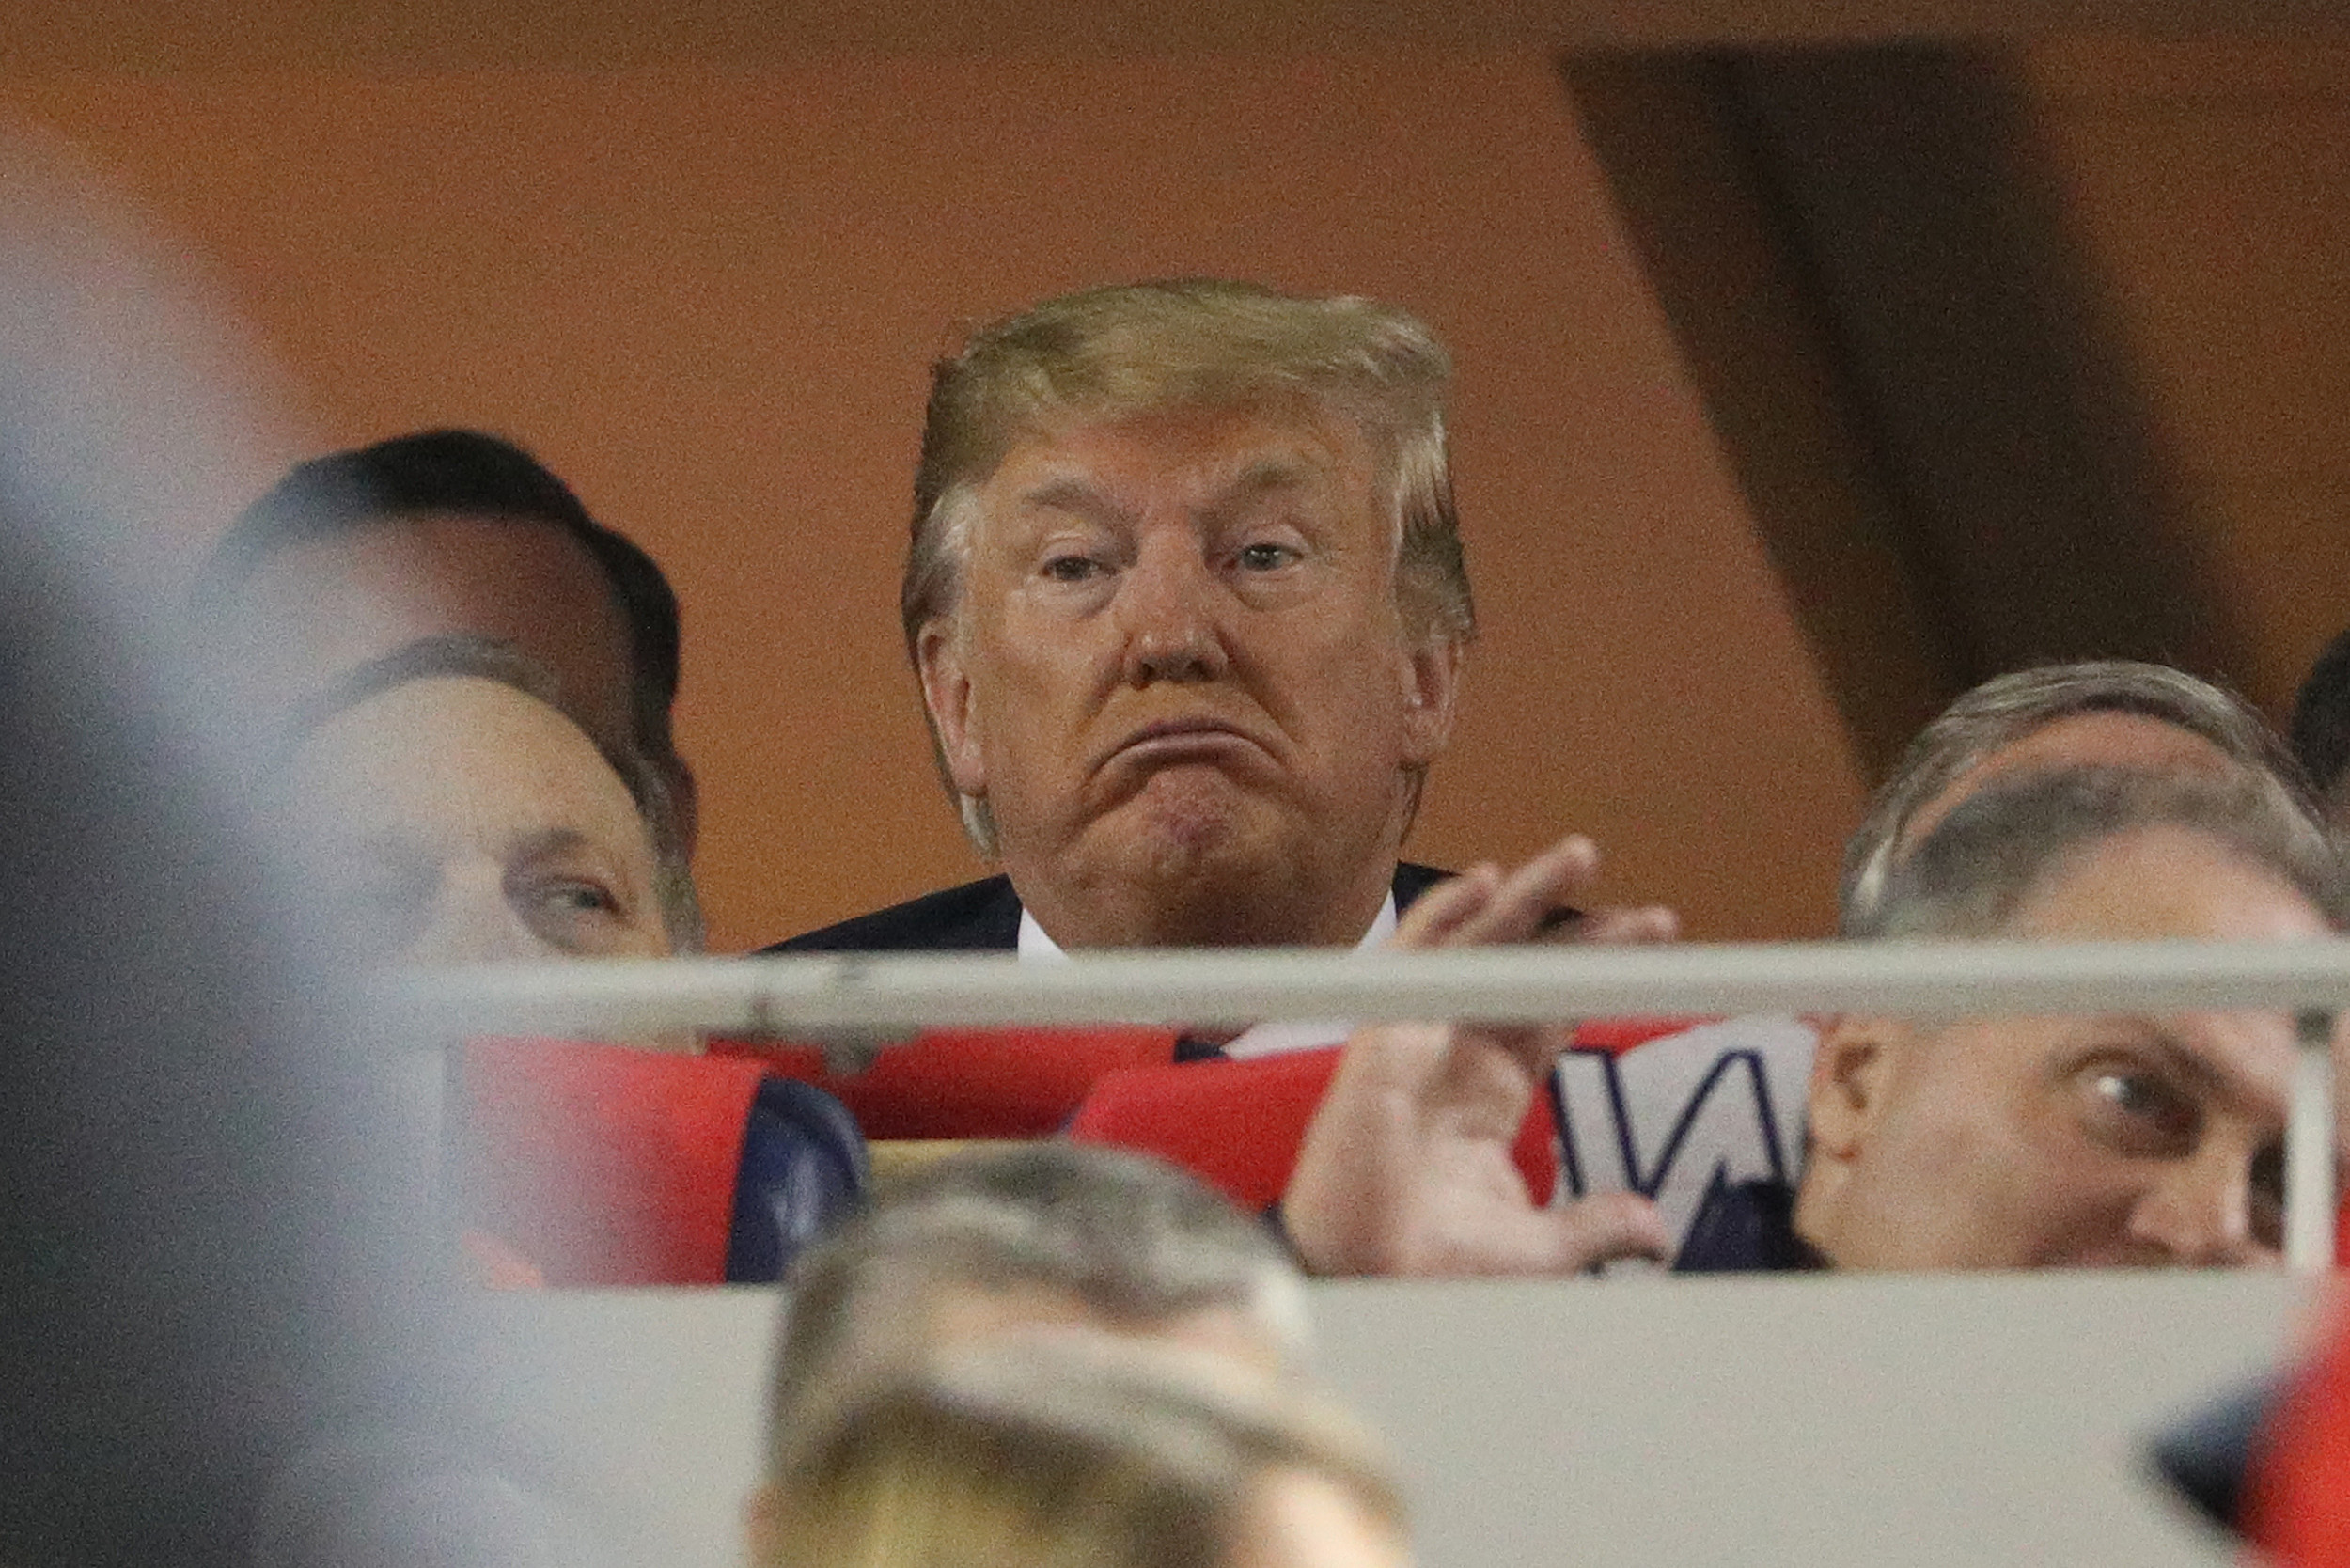 Lock Him Up Donald Trump S Face Drops As He Notices Crowd Booing At World Series